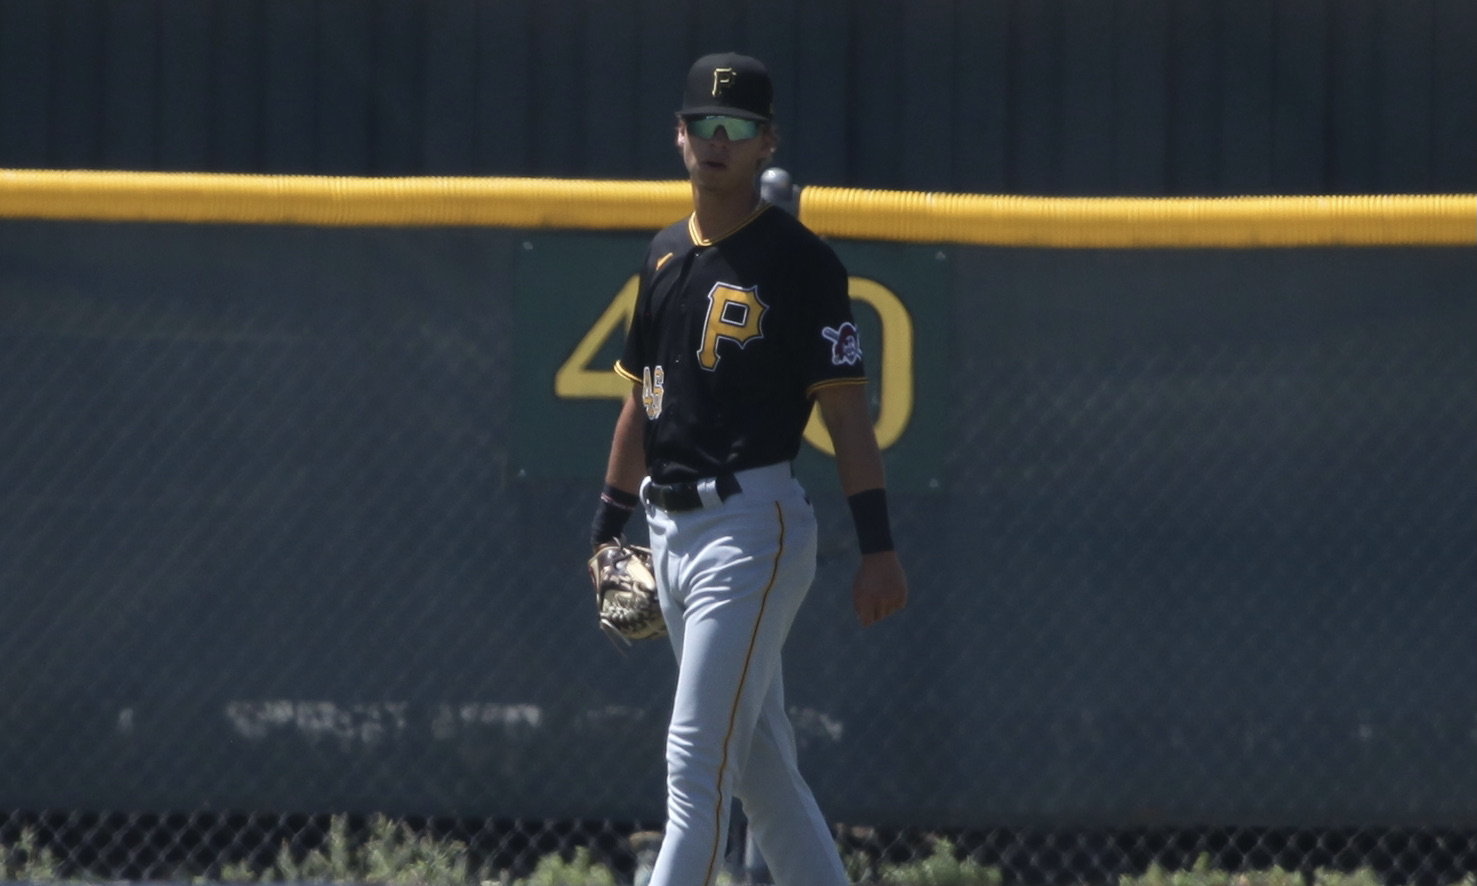 Pirates Prospects Player of the Week: Connor Scott